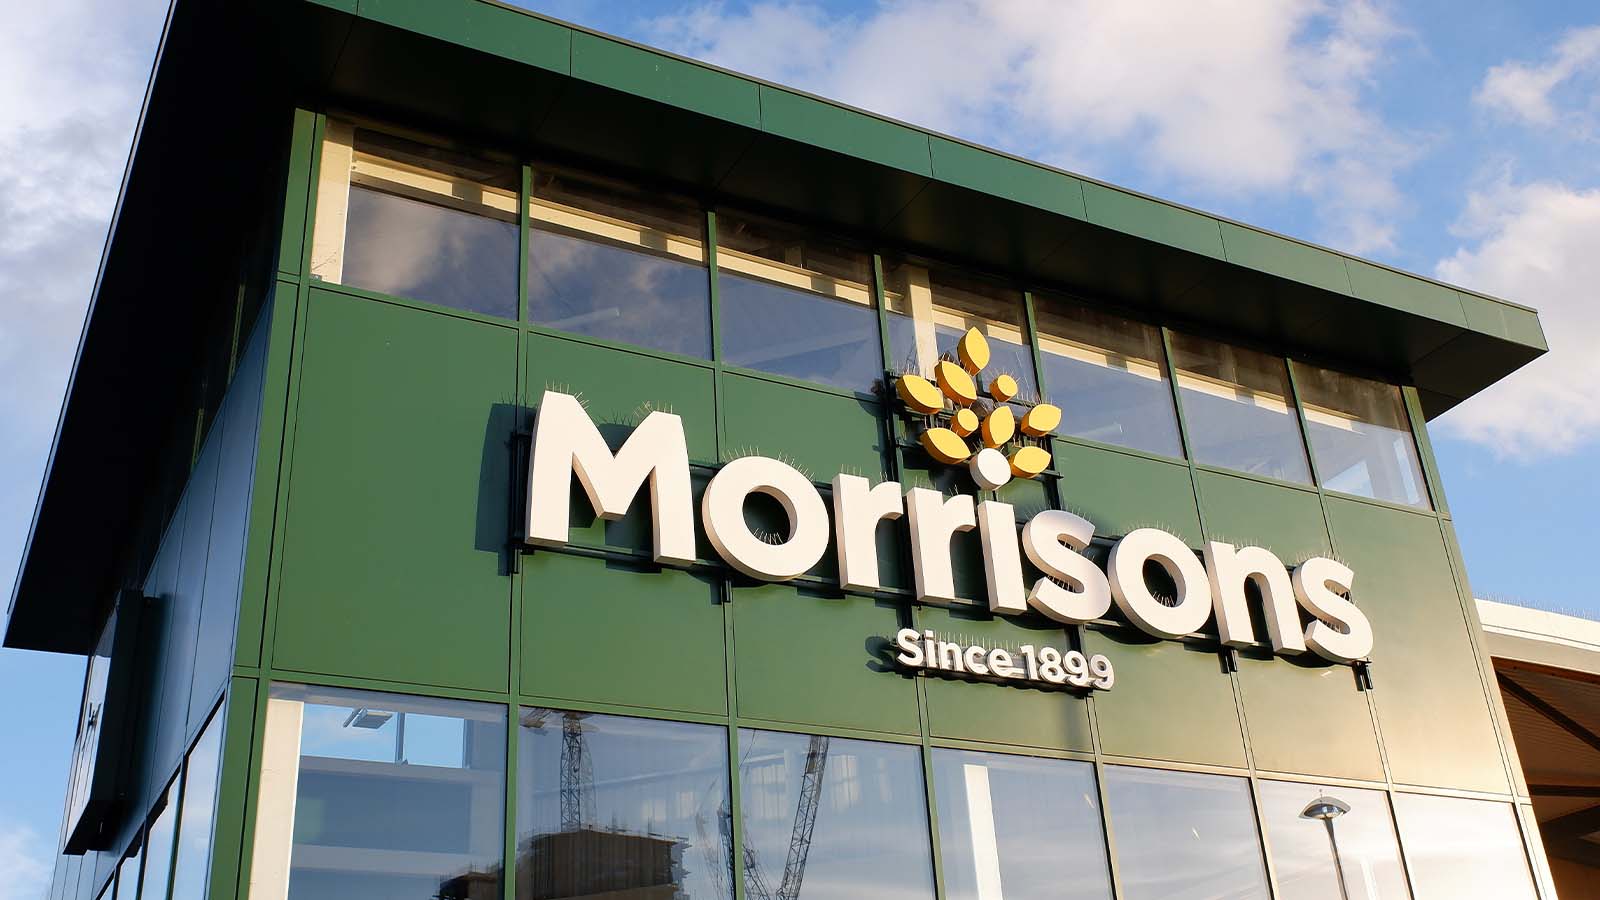 UK Supermarket Leader Morrisons Selects Eagle Eye to Supercharge Loyalty and Promotions Capabilities